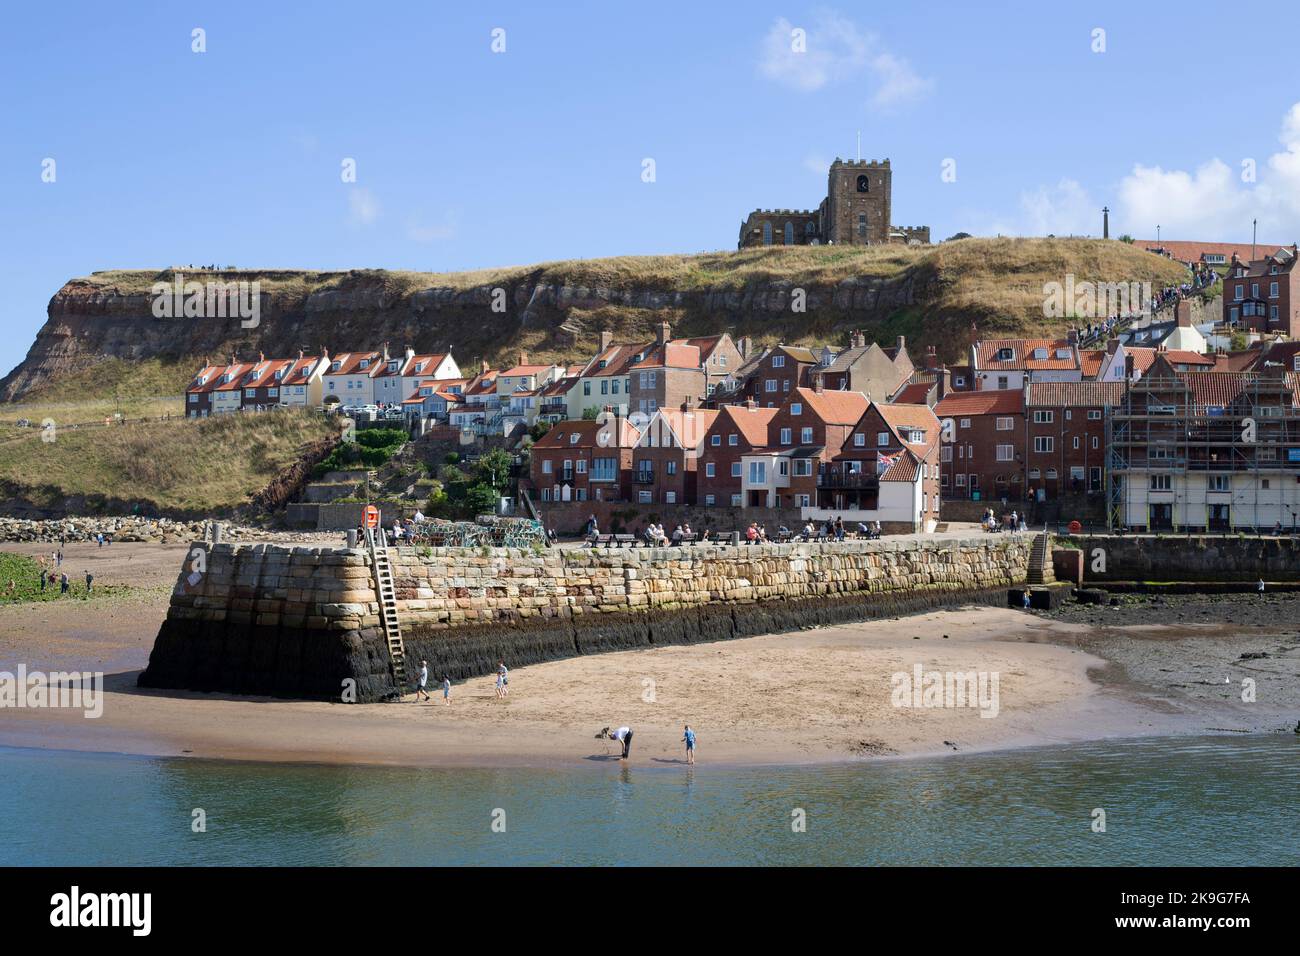 People “crabbing” on the pier in the seaside town of Whitby in North Yorkshire in Northern England. Stock Photo